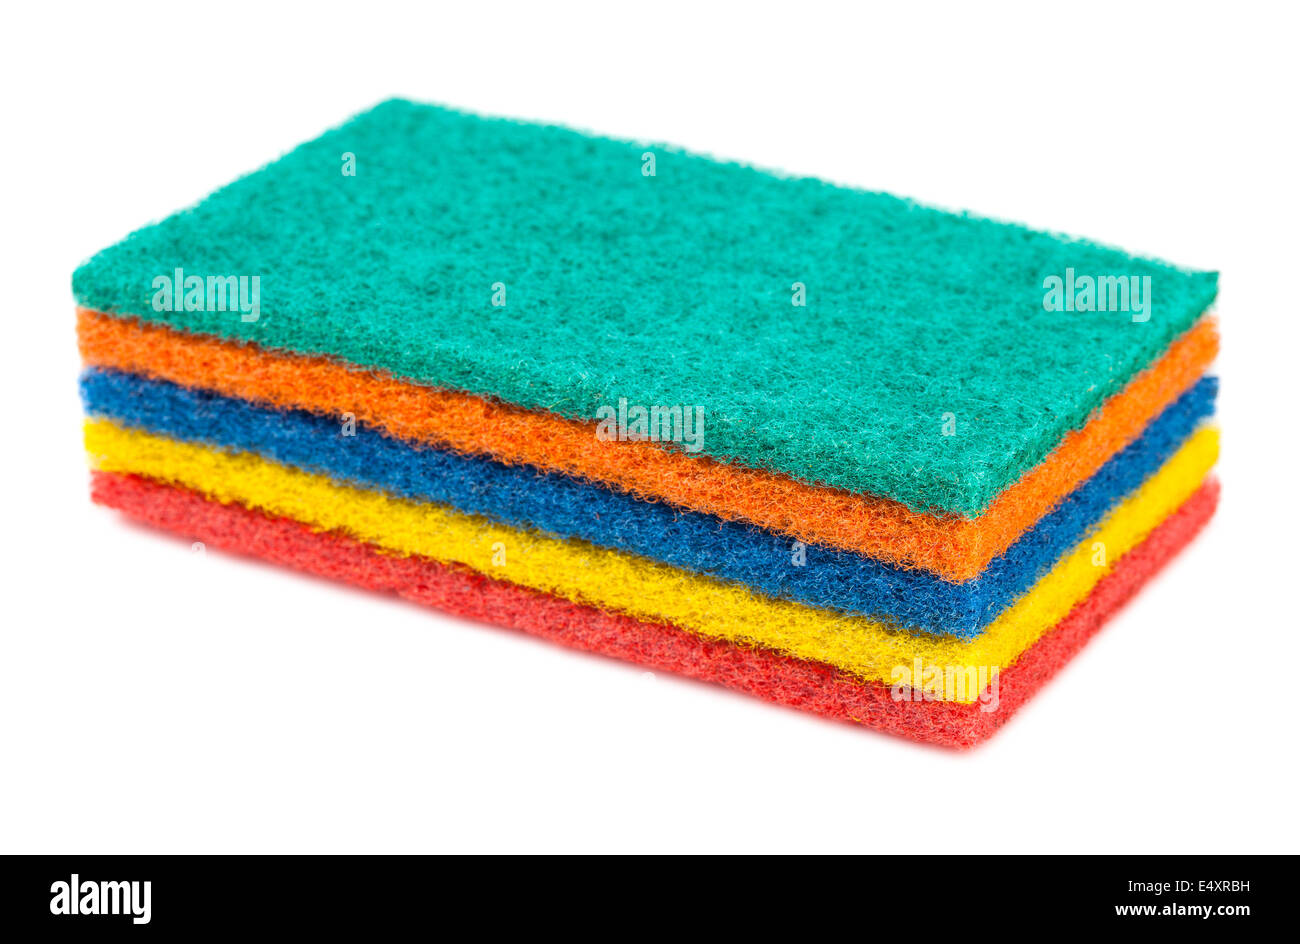 Stack of kitchen sponges Stock Photo